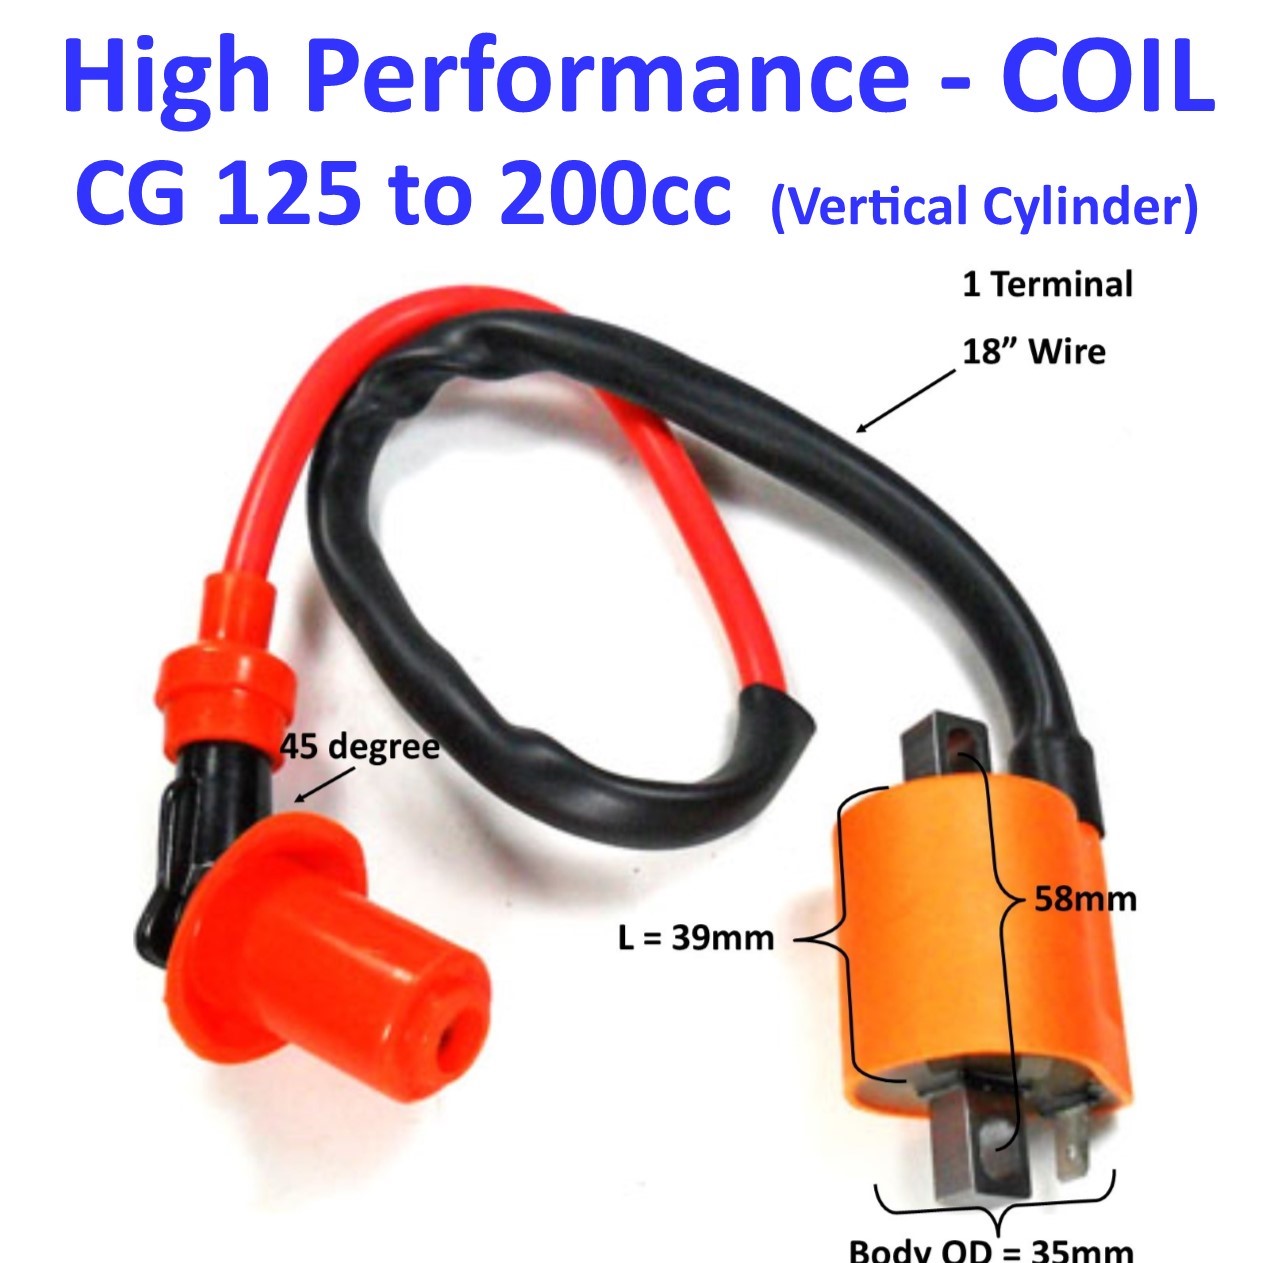 Ignition Coil RACING HIGH PERFORMANCE Plug Cap=45deg, 18" 1 Terminals Fits Many ATVs, Motocycles With 110-250cc Engines - Click Image to Close